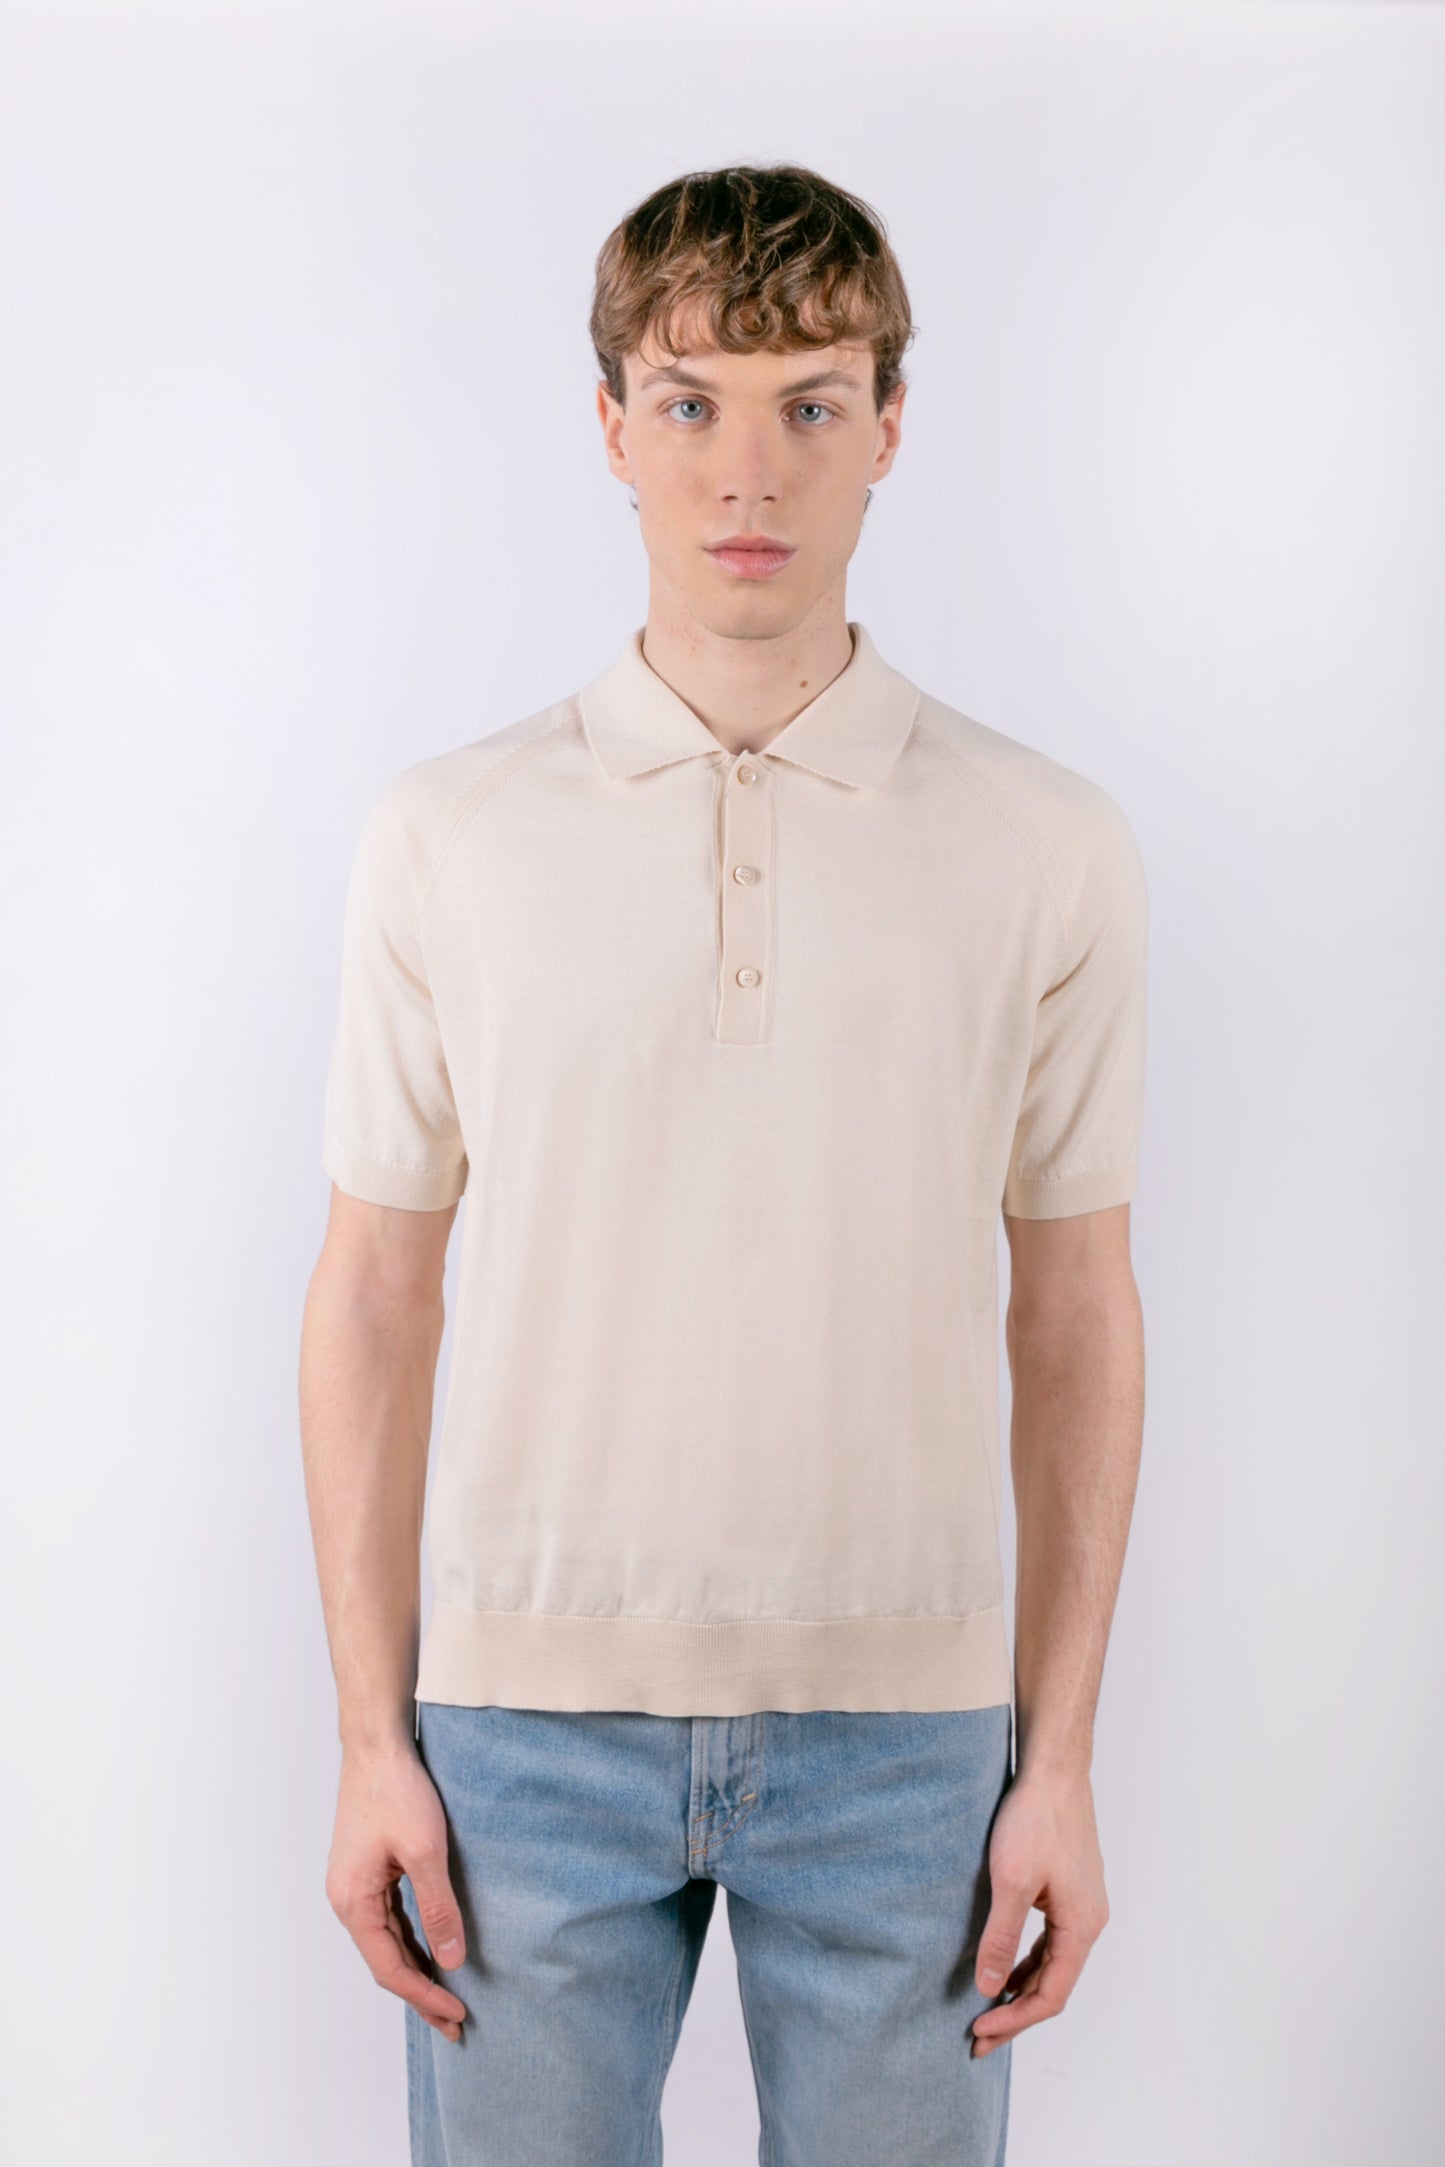 Short-sleeved polo shirt in natural color in silk and cotton